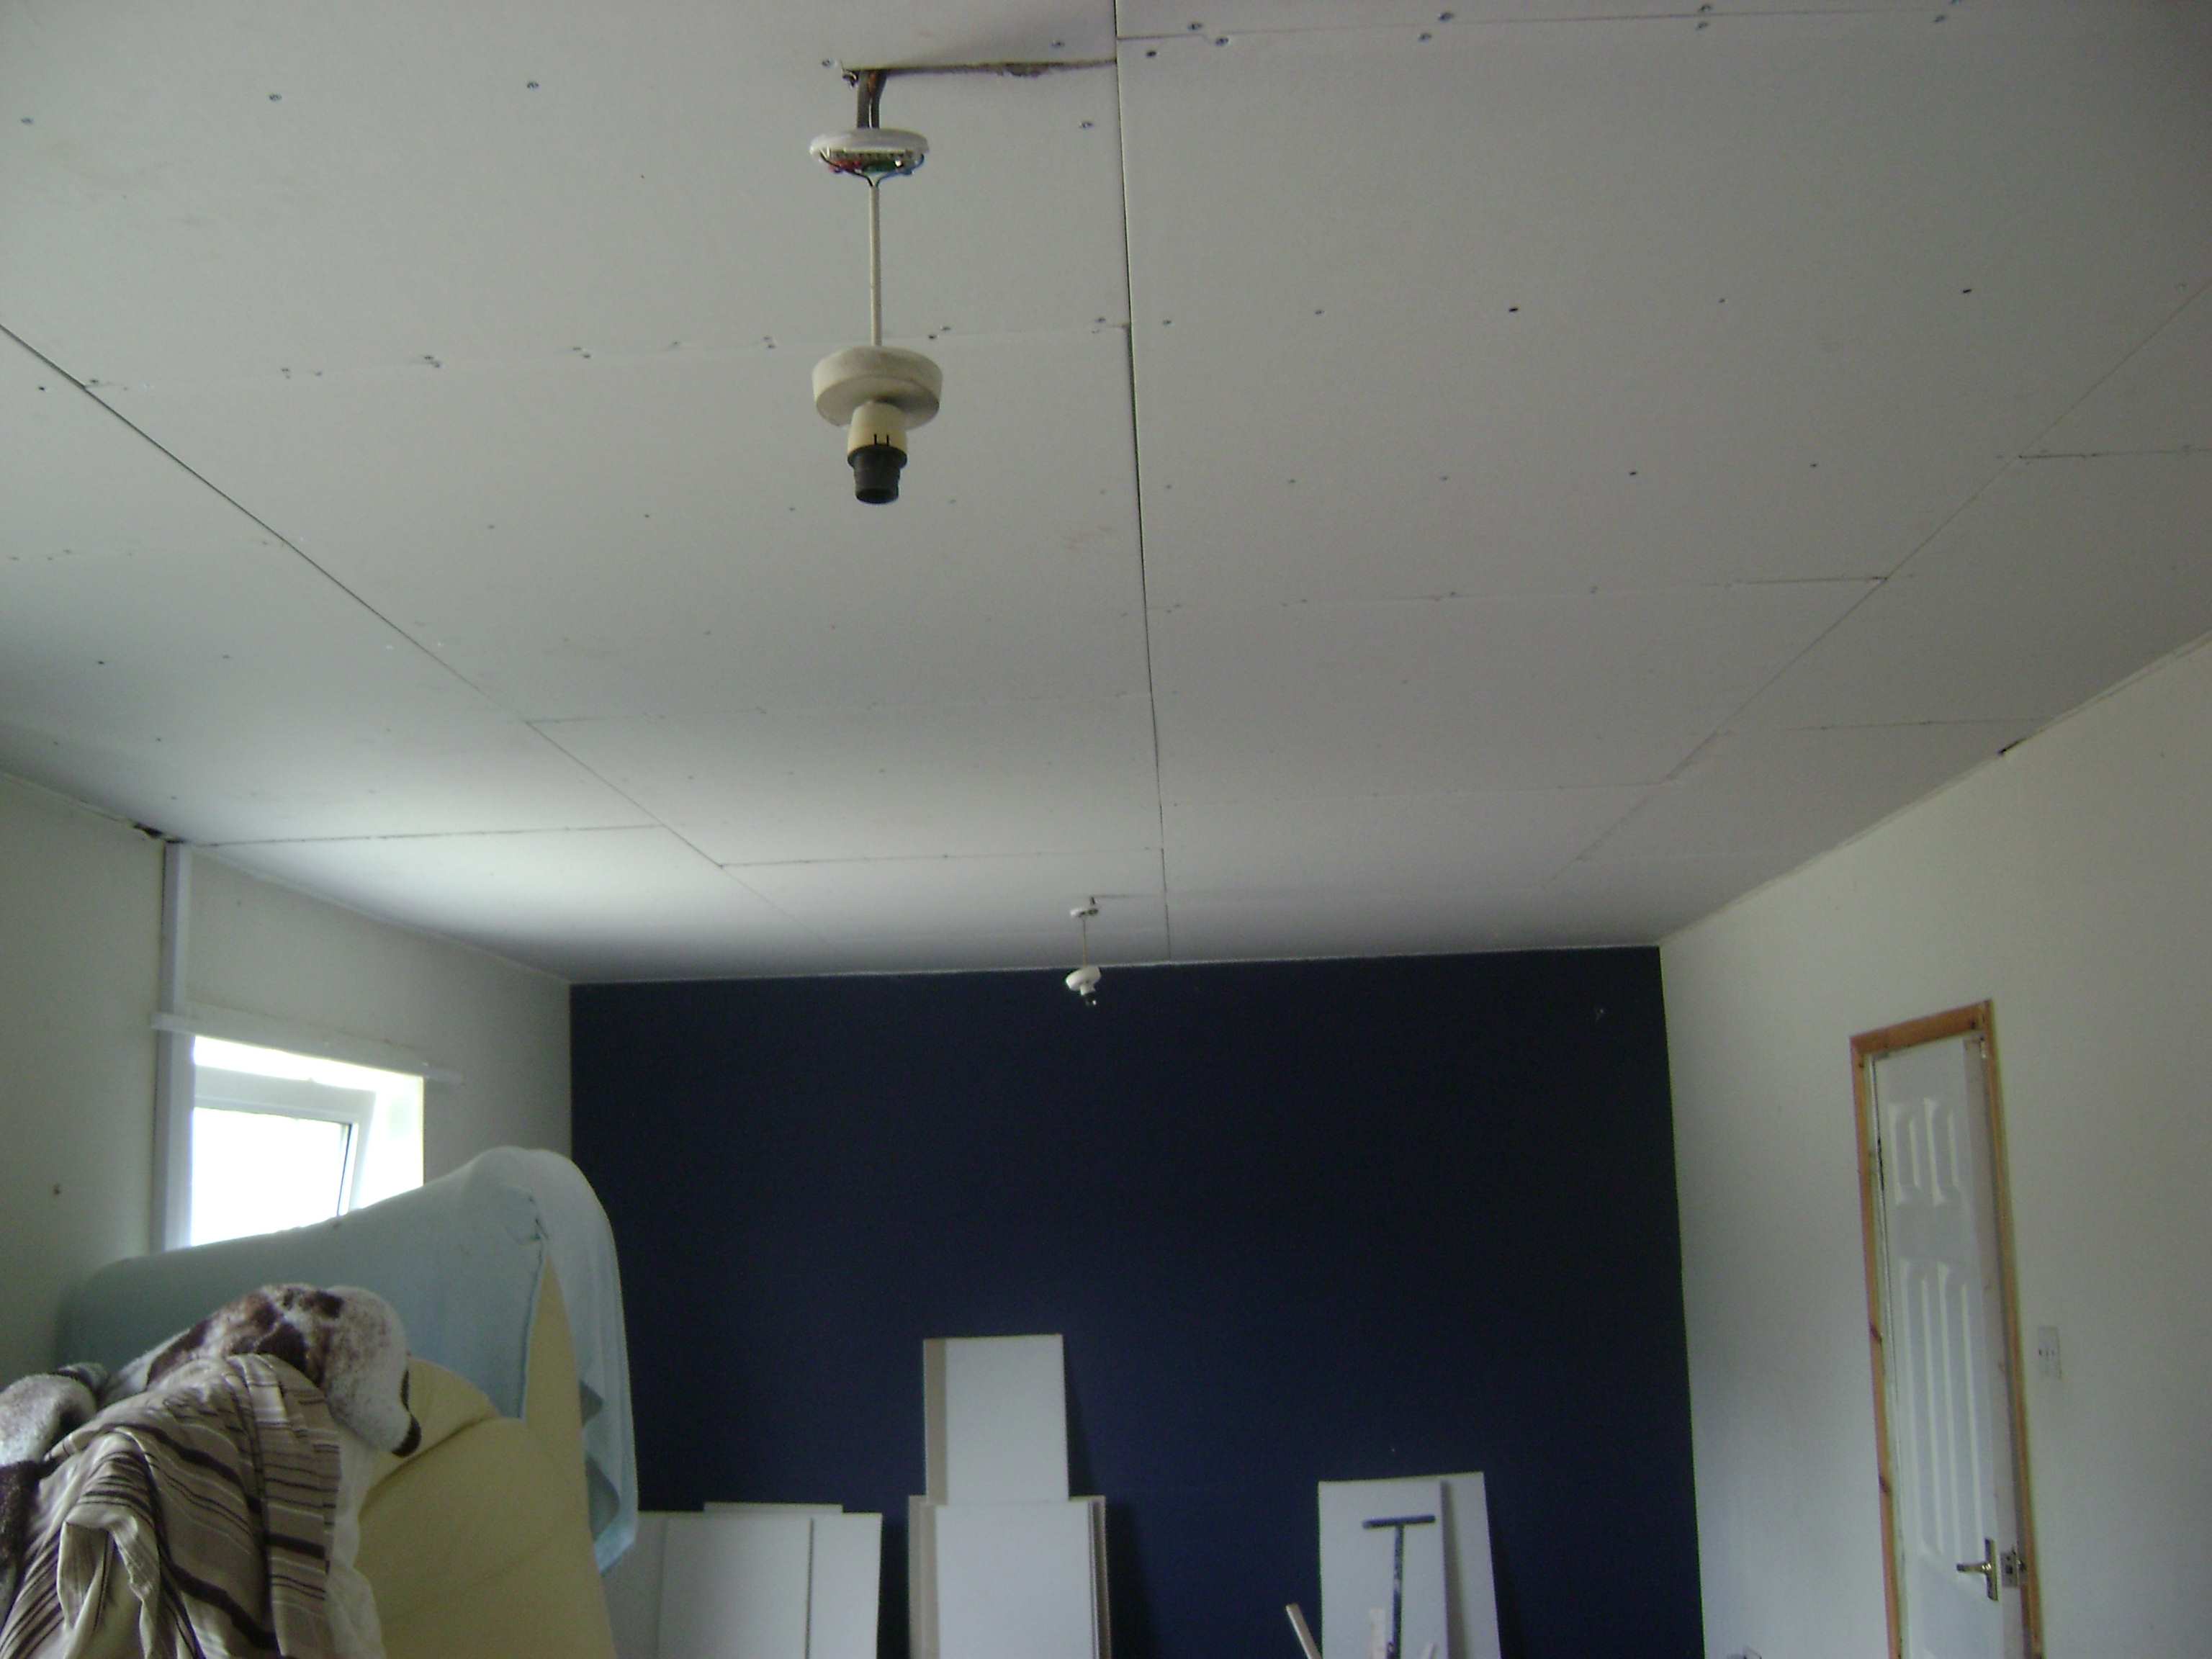 Following removal of the timber battens, the joists were located and the ceiling was overboarded